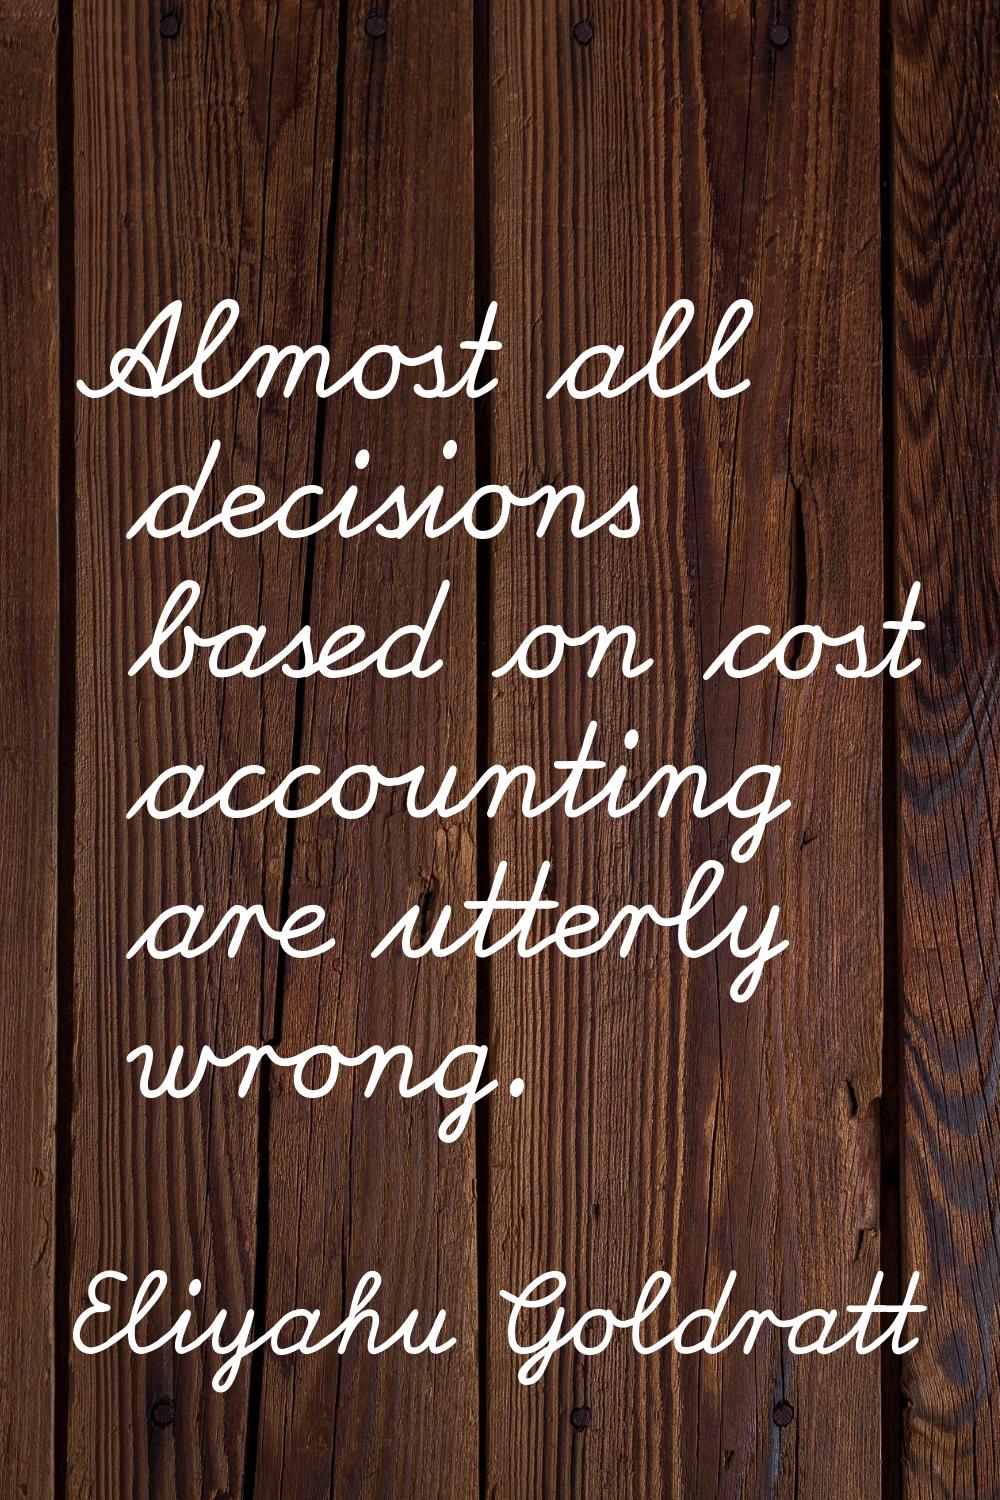 Almost all decisions based on cost accounting are utterly wrong.